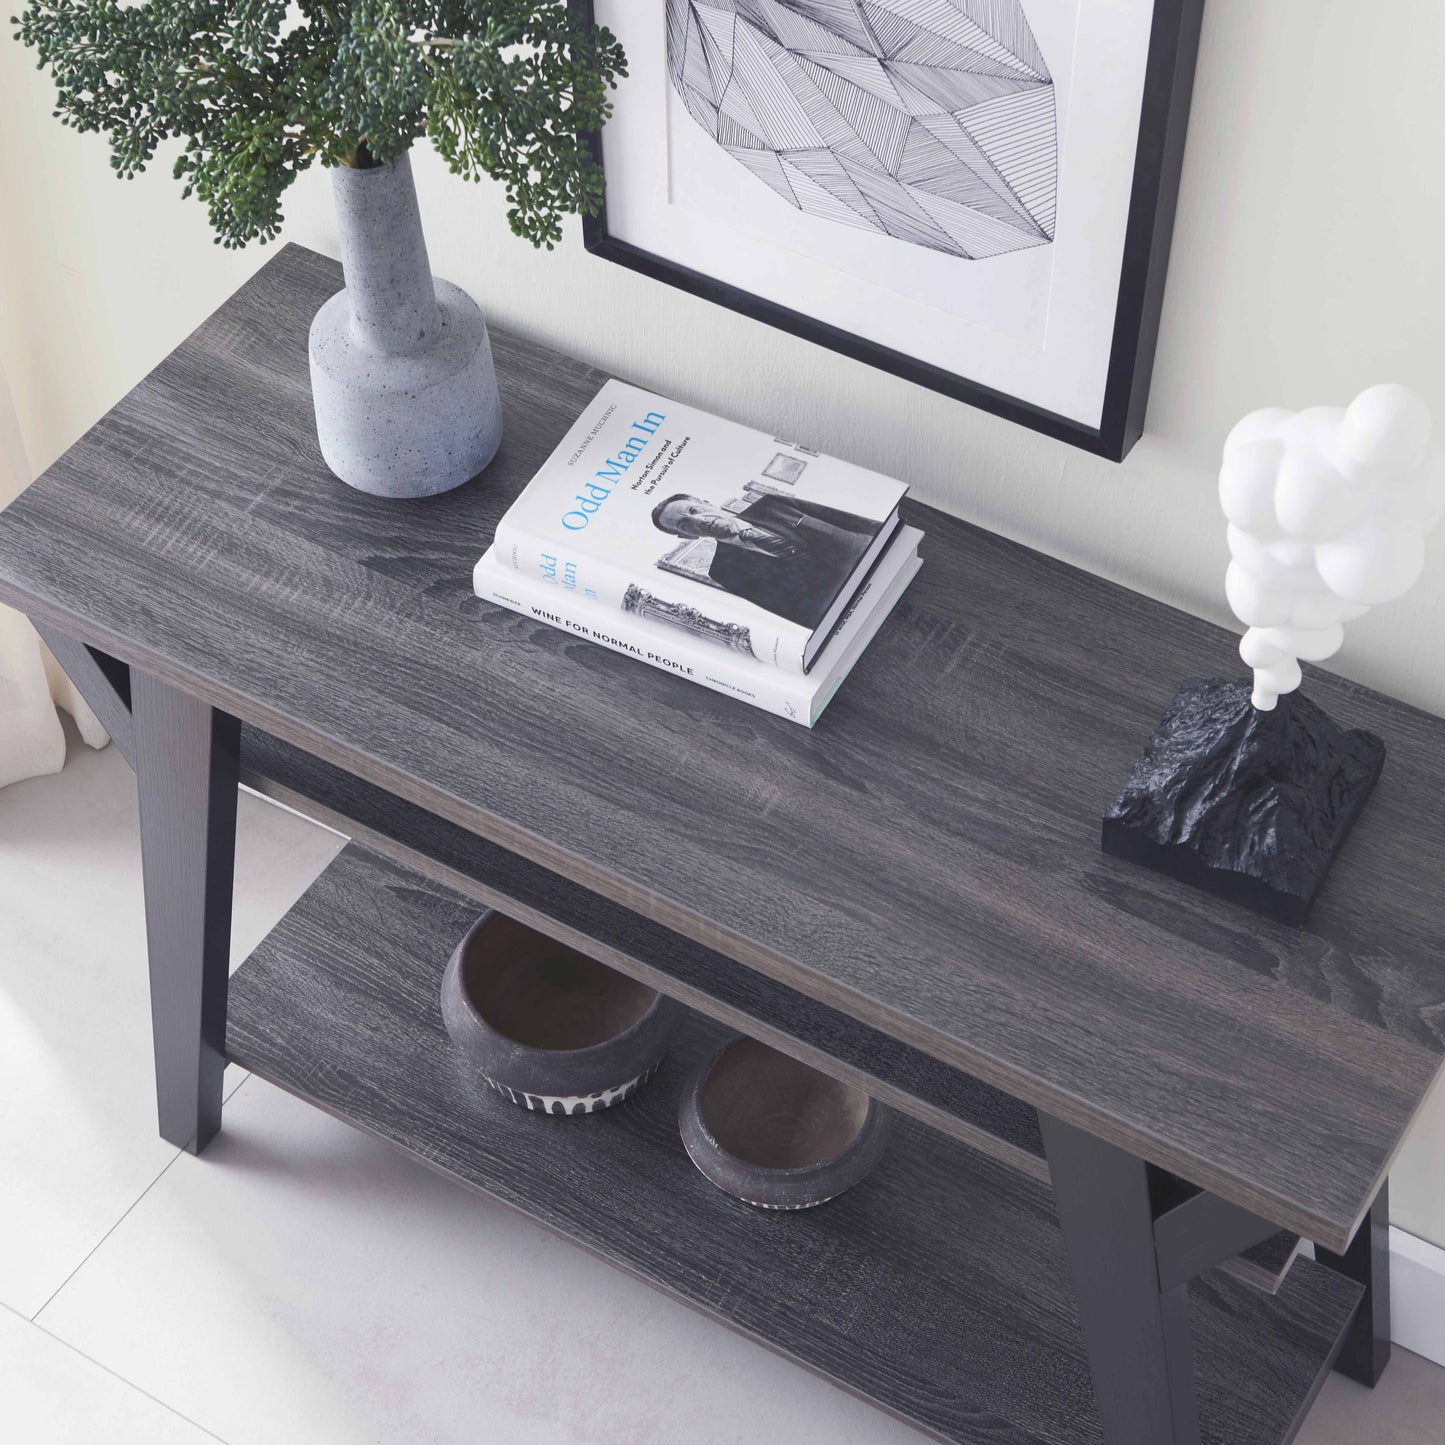 Distressed Grey & Black Two-Tier Console Table